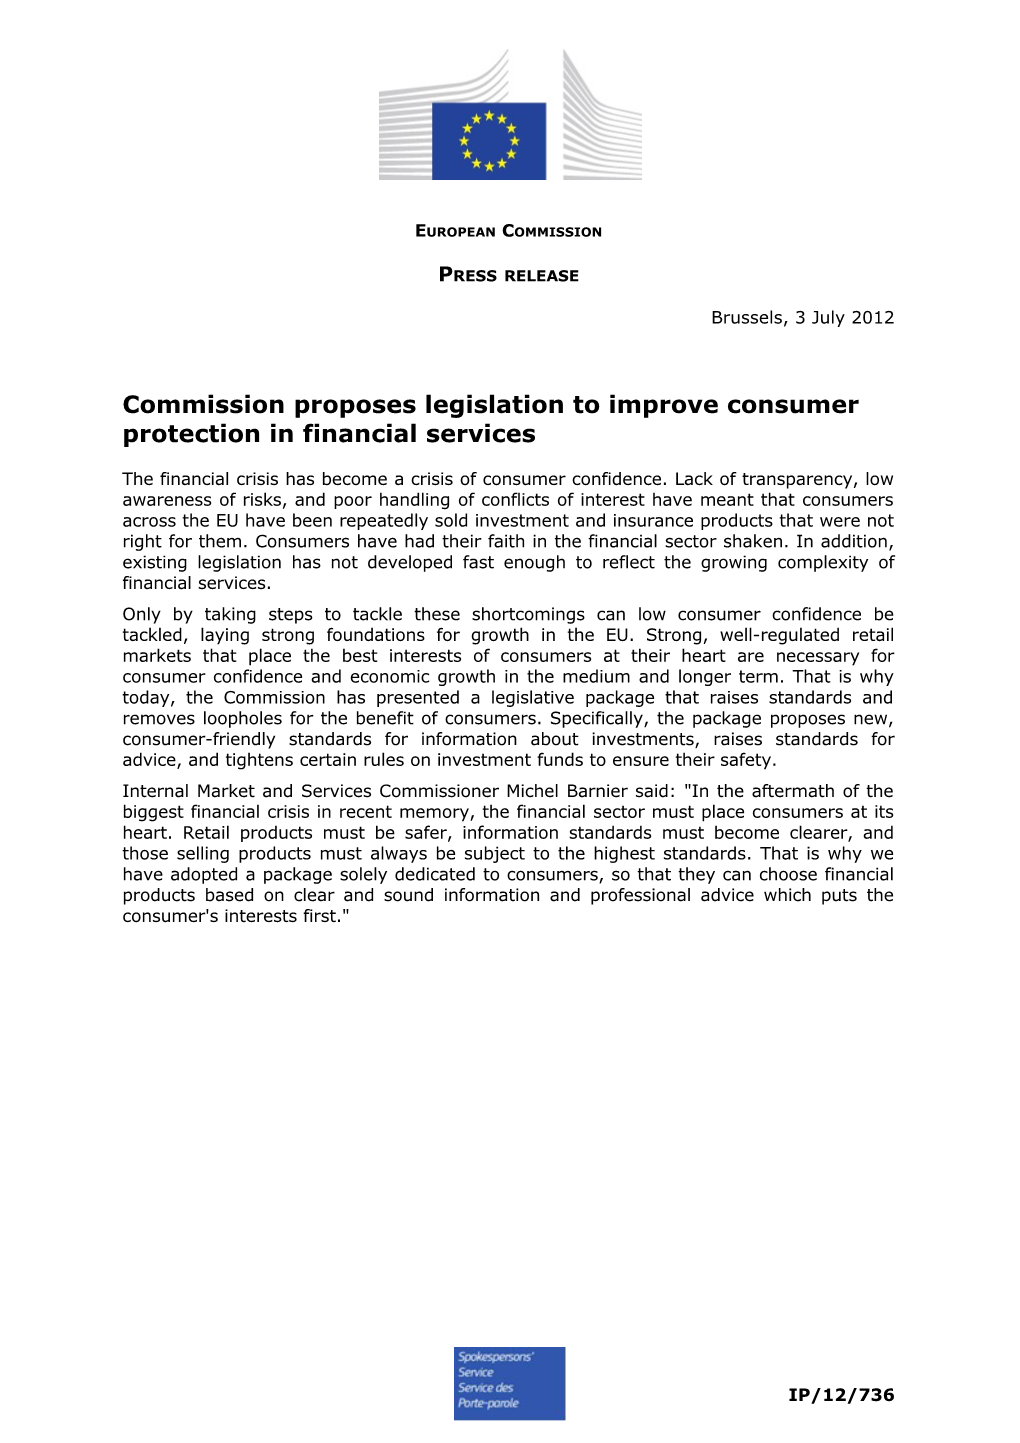 Commission Proposes Legislation to Improve Consumer Protectionin Financial Services